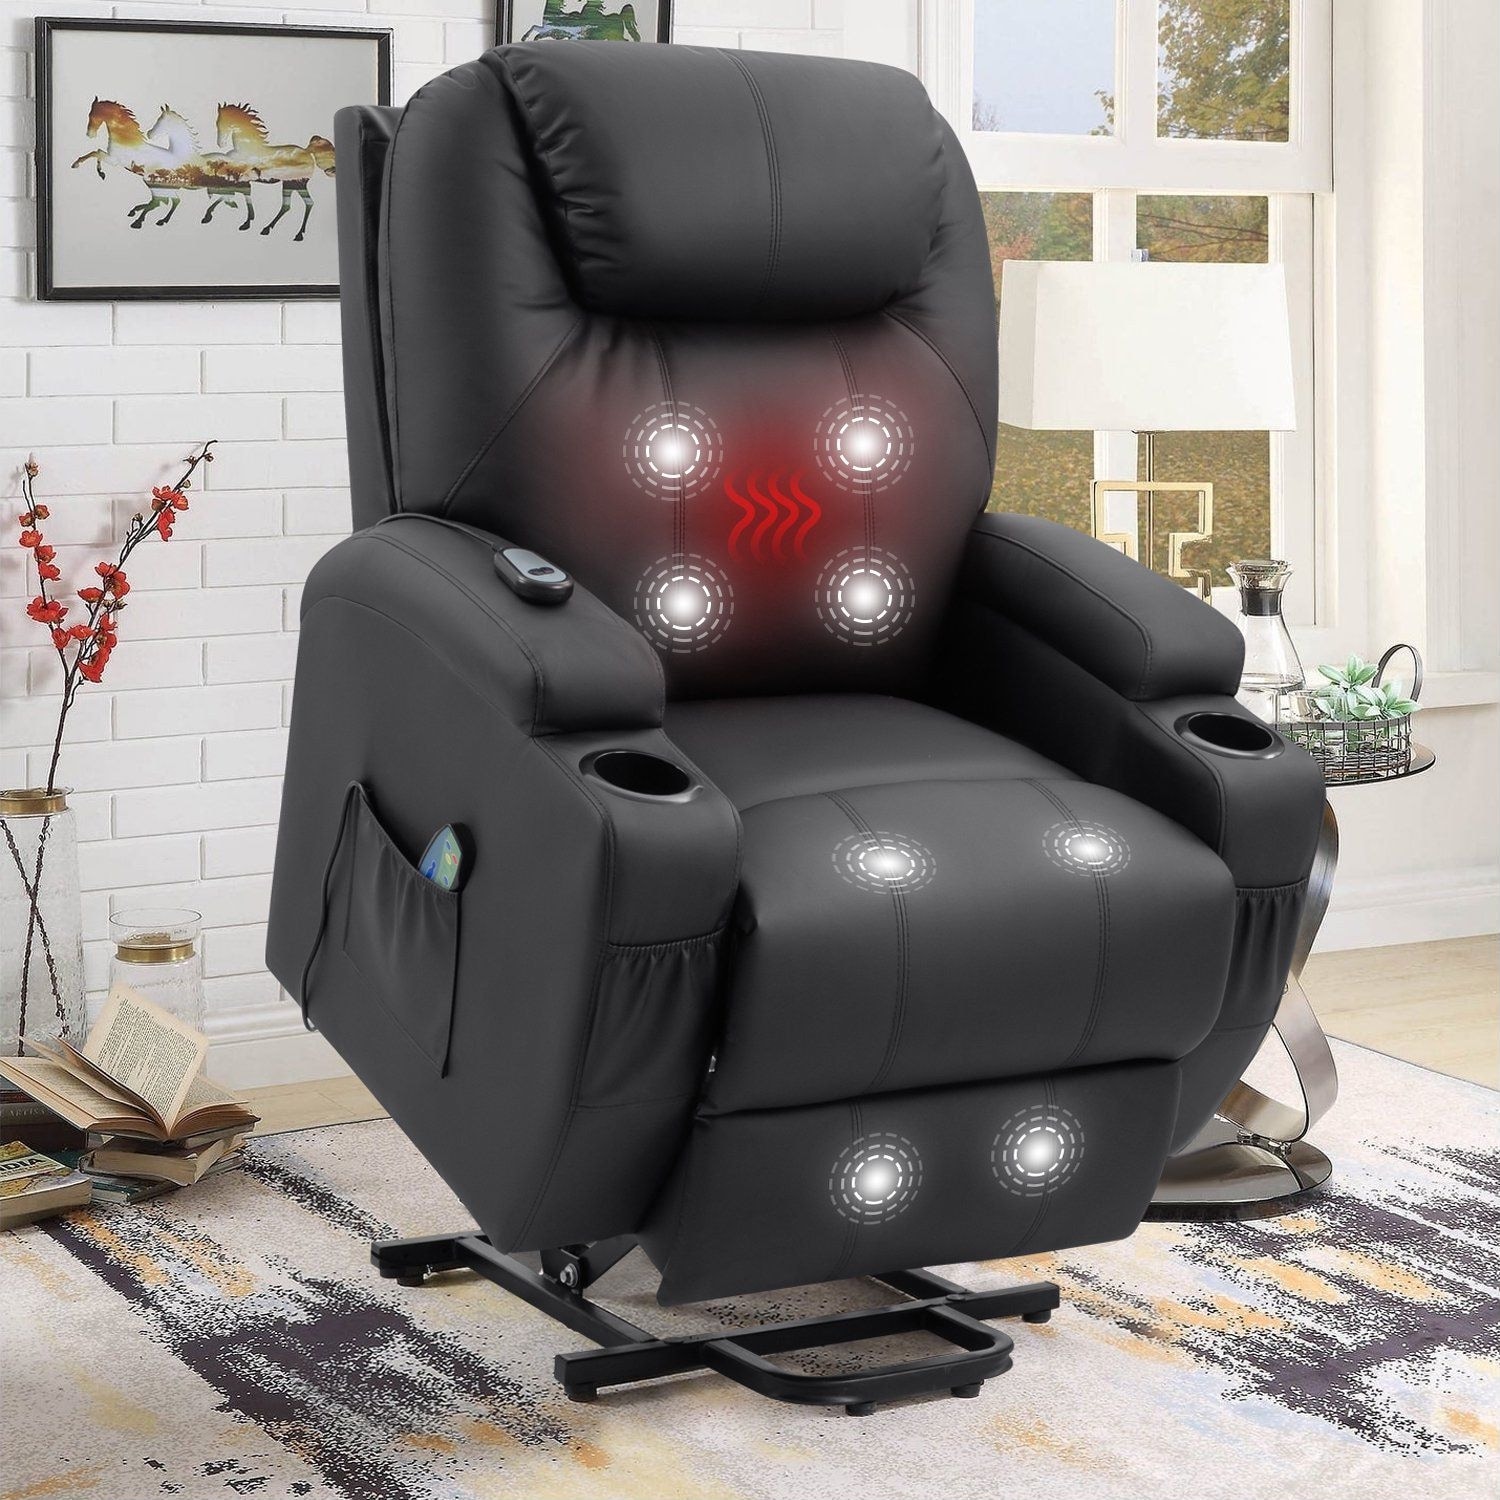 https://ak1.ostkcdn.com/images/products/is/images/direct/44221cd4d1c77c99c488e47870e49743f1329877/Power-Lift-Recliner-with-Massage-and-Heat%2C-Black-Brown-Grey-Faux-Leather.jpg